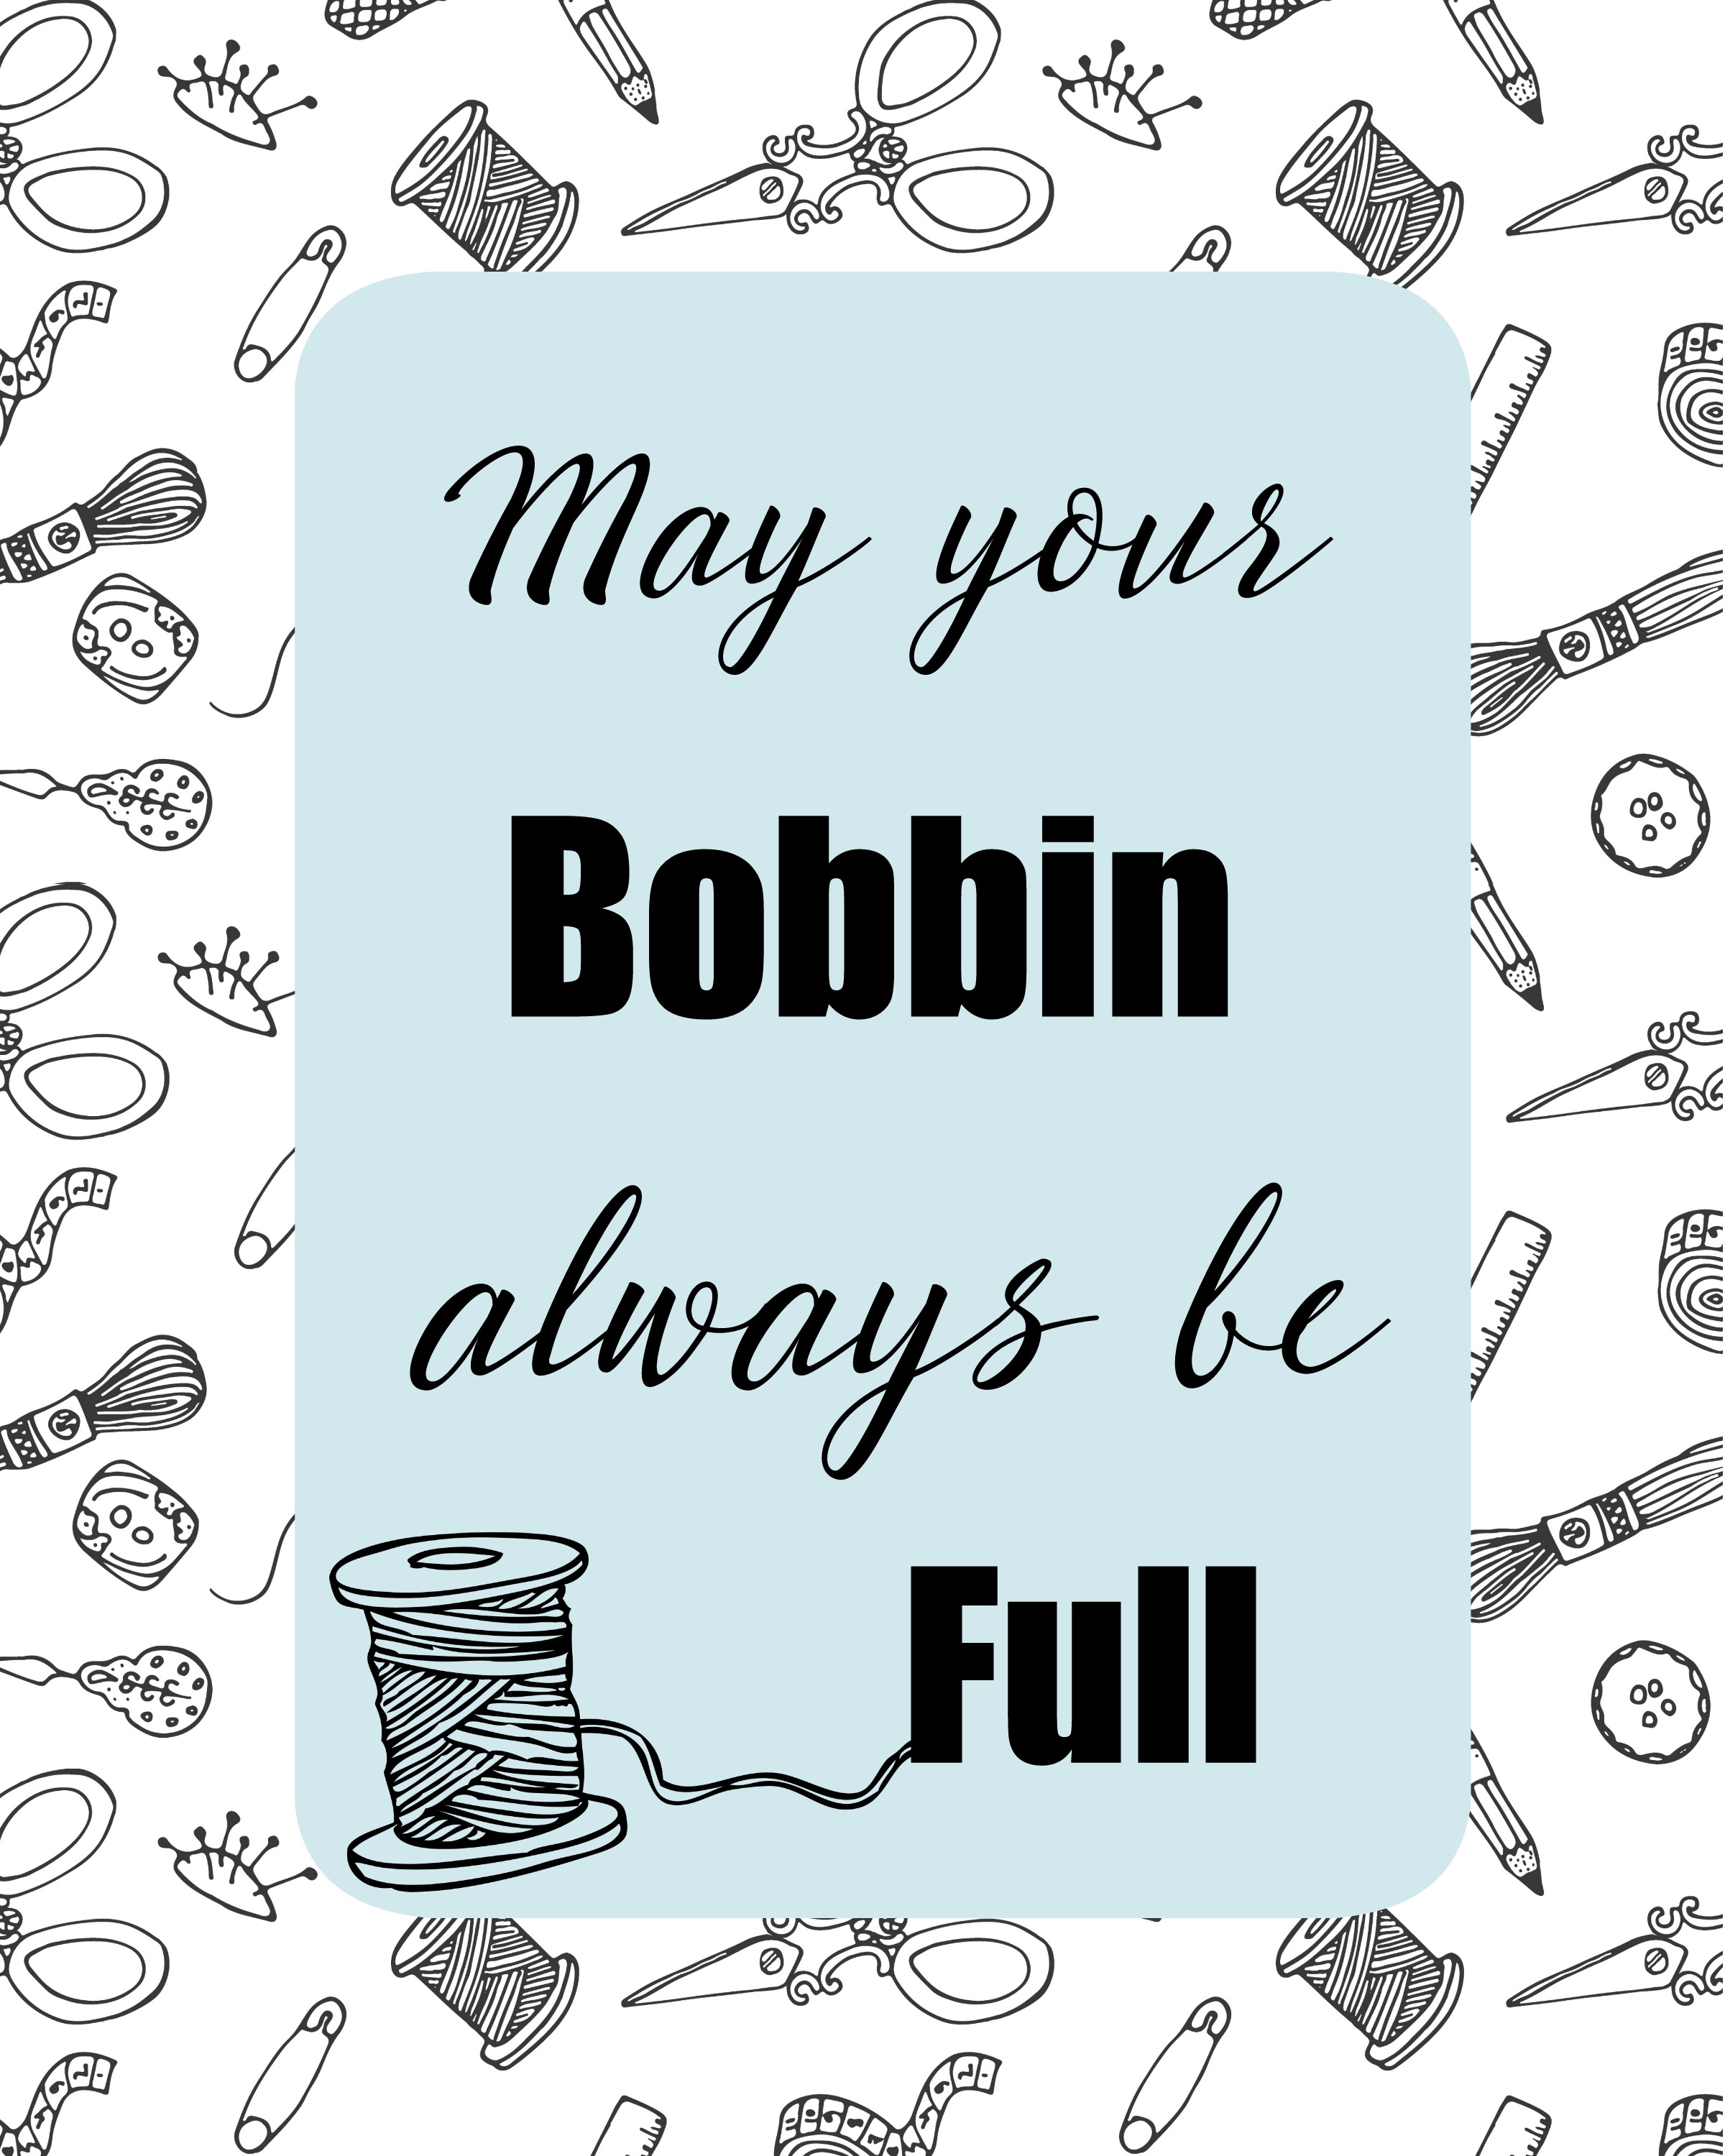 Sewing Room Printbales: May Your Bobbin Always Be Full Printable | www.sewwhatalicia.com